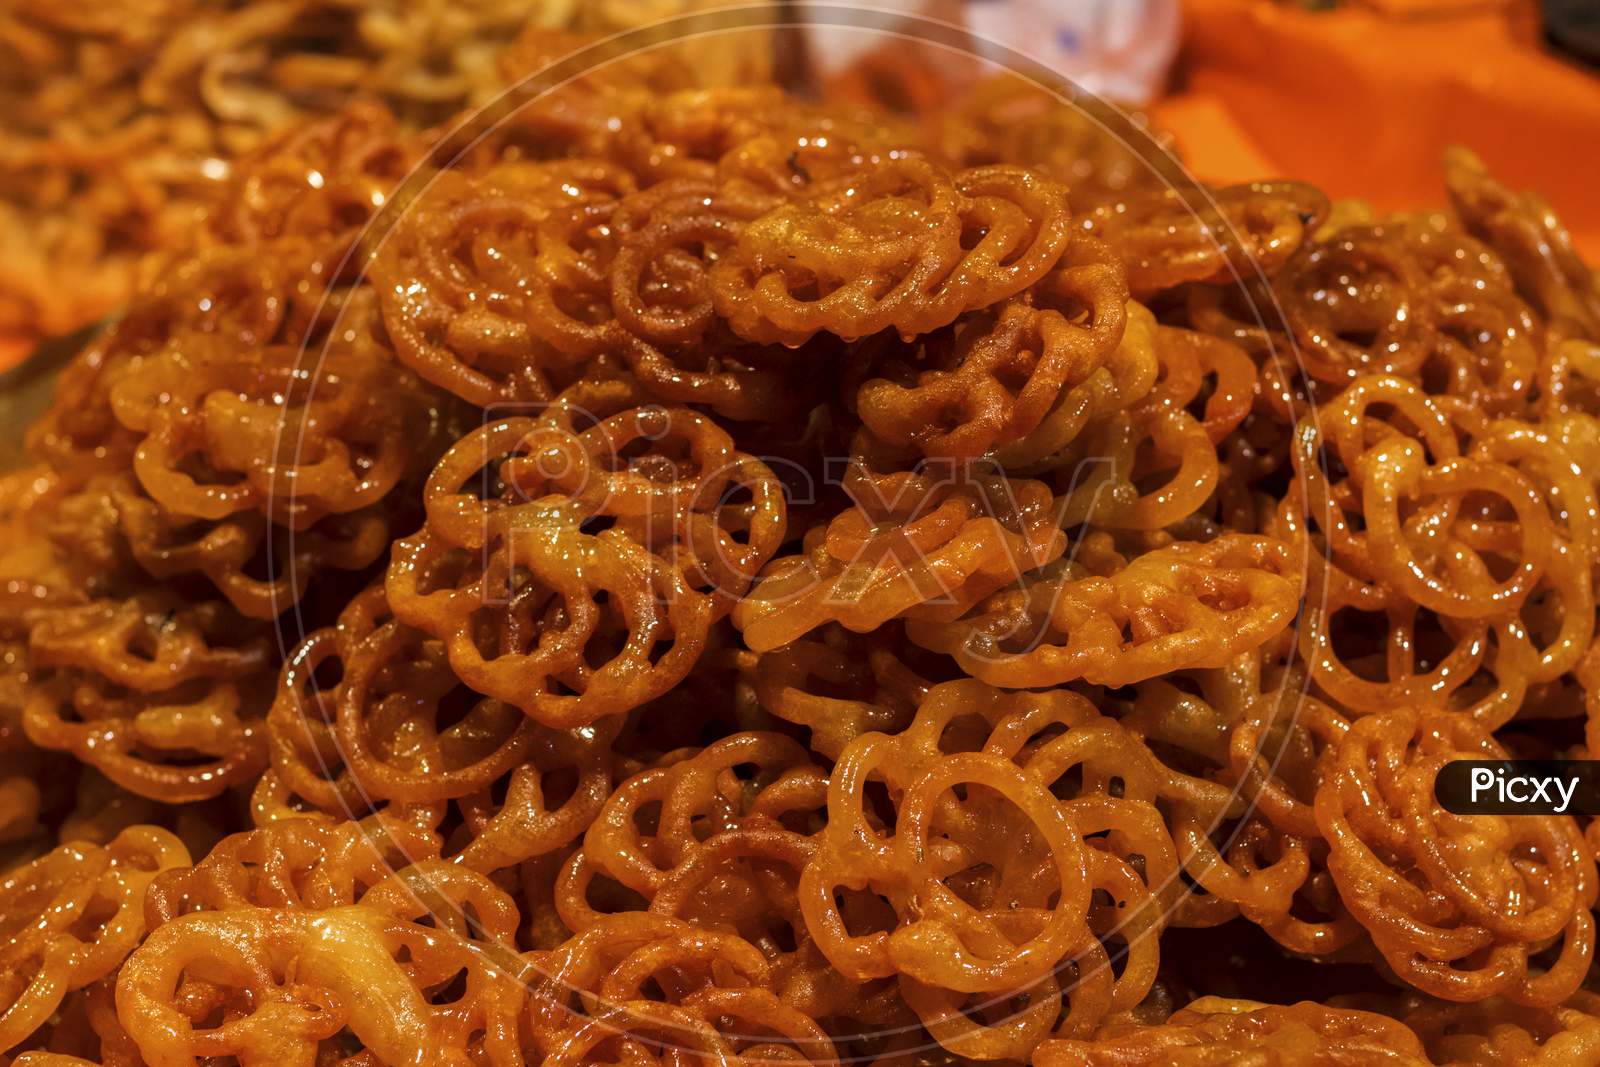 Jalebi is an Indian sweet and delicious food made of Maida flour and sugar syrup